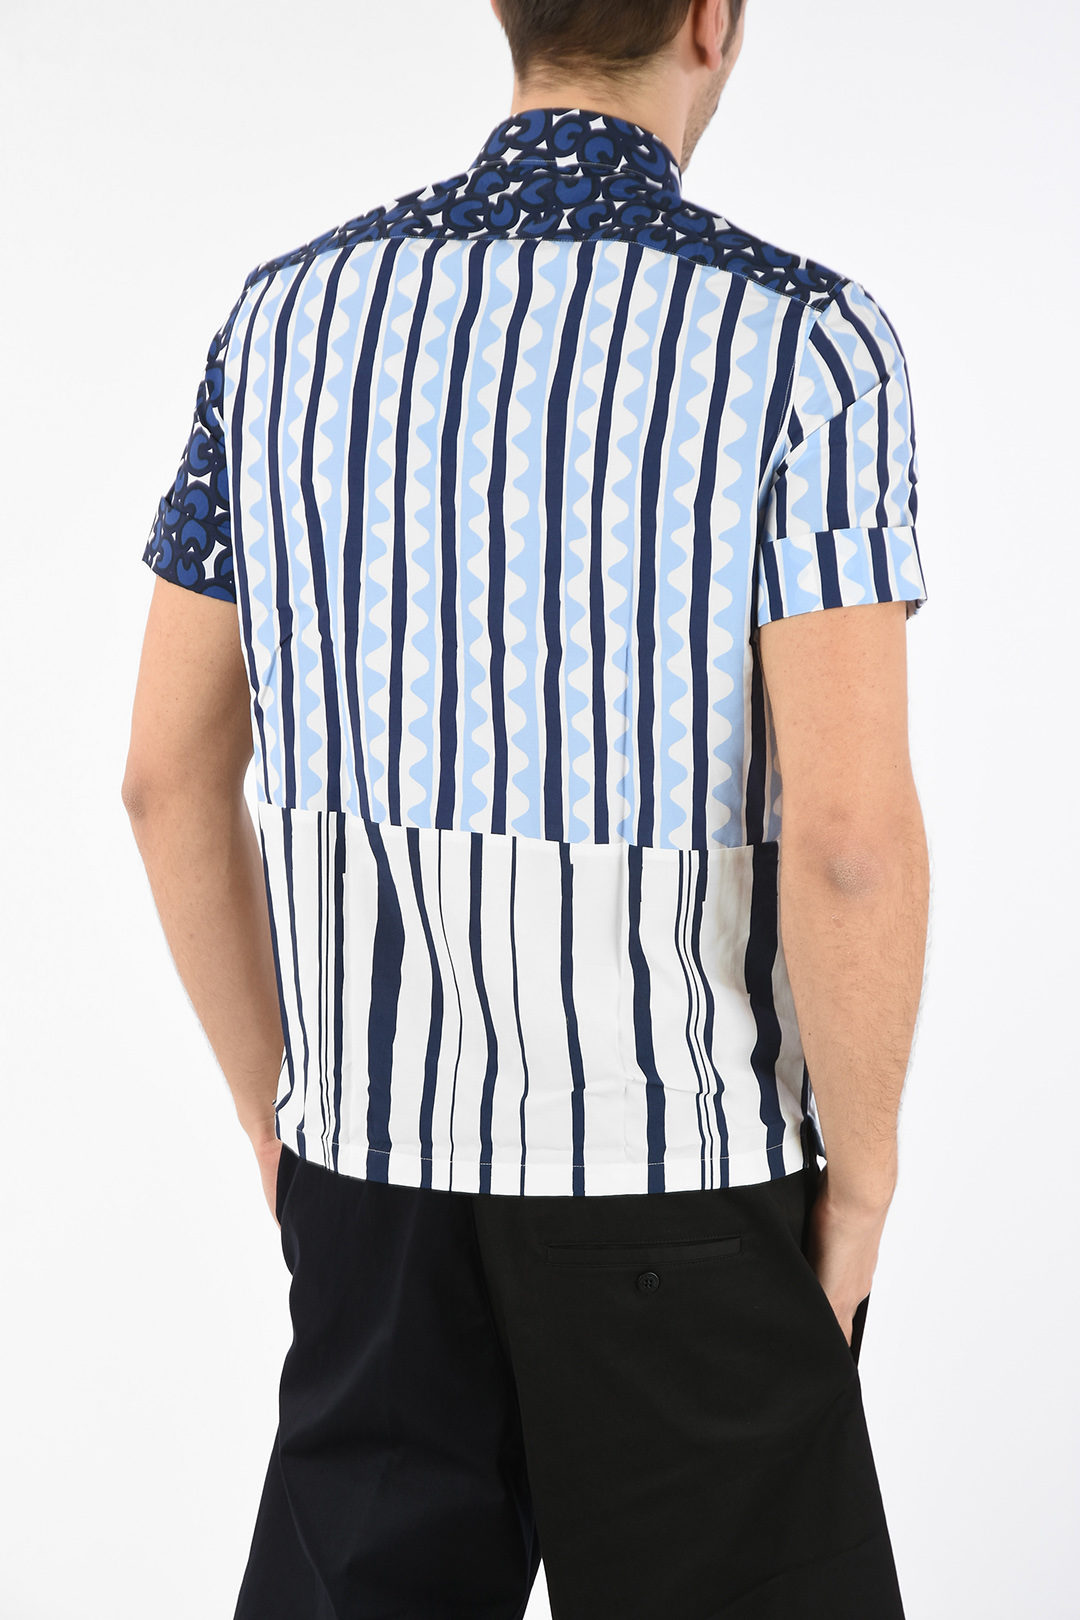 Neil Barrett Striped Shirt with Spread Collar men - Glamood Outlet